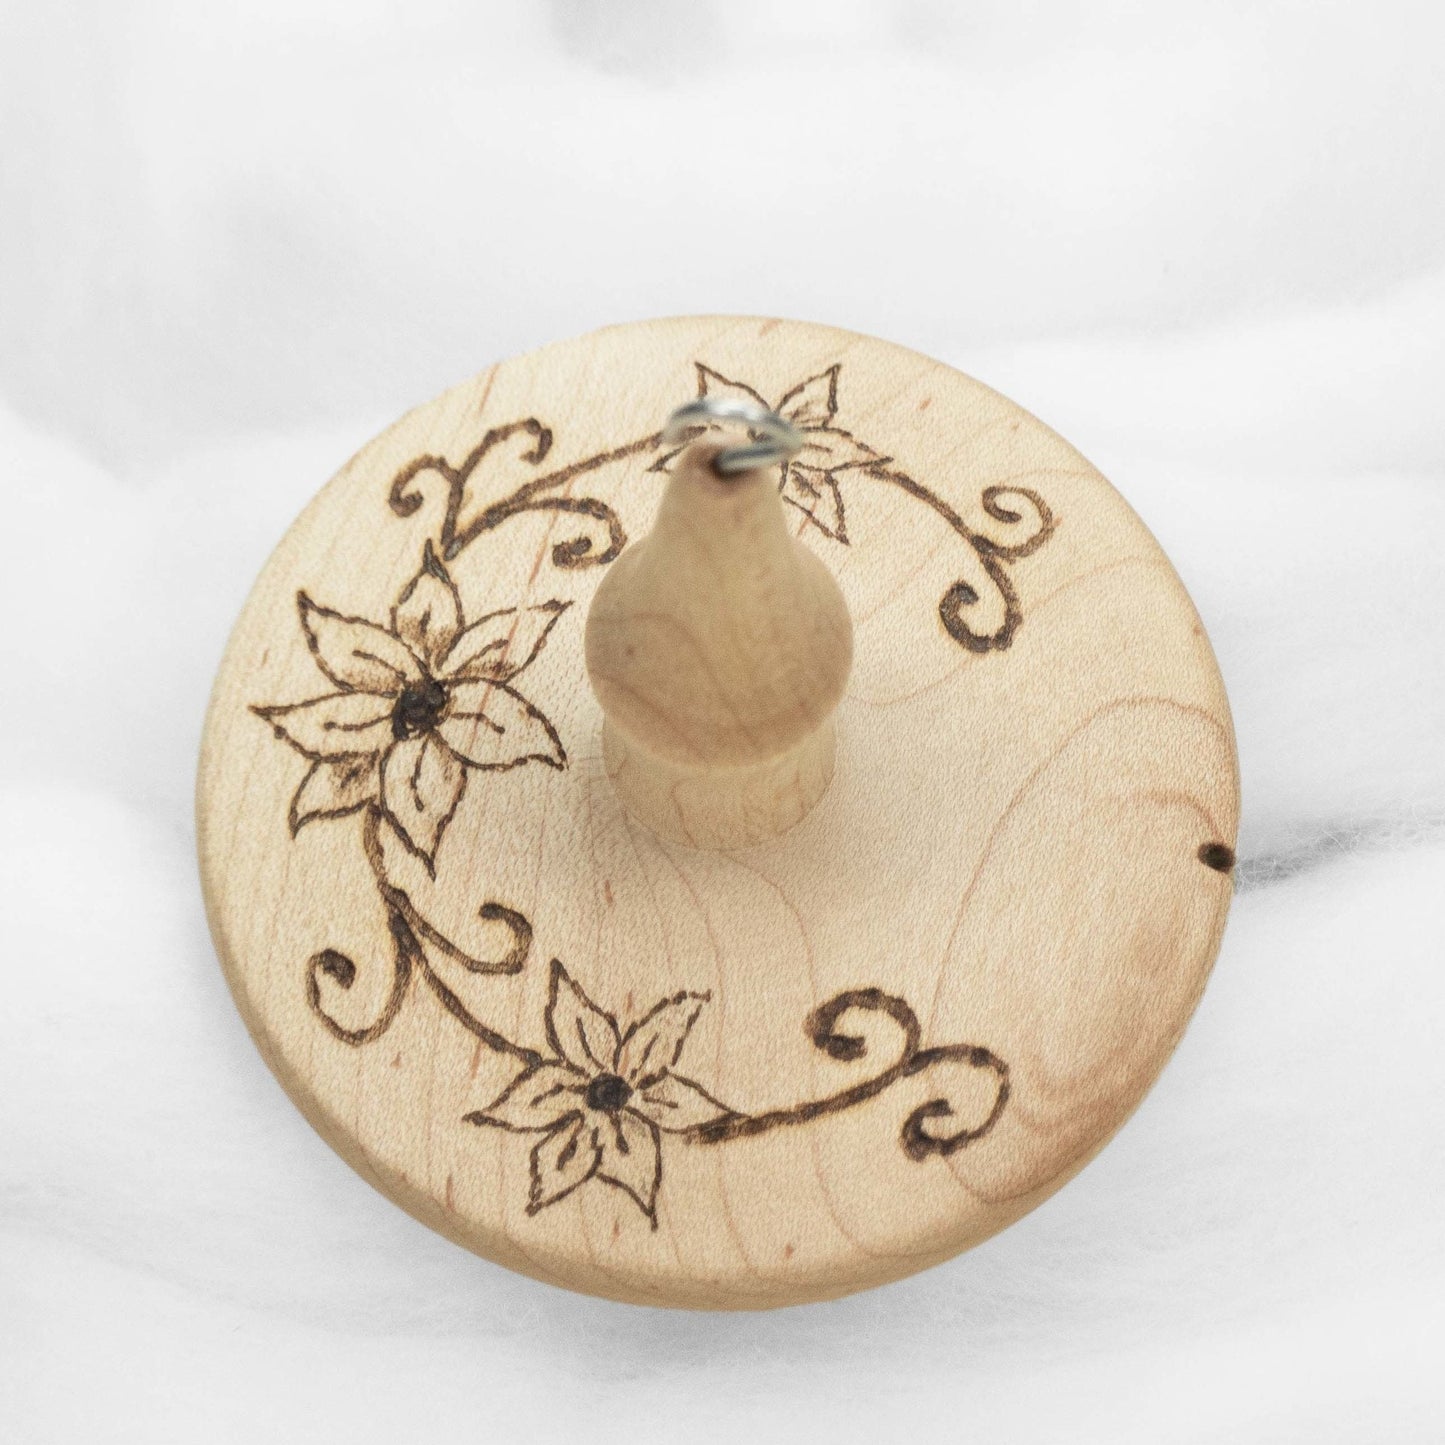 Clematis Vine - Llampetia Hand-Turned Maple Wood Drop Spindle Heavyweight - Top Whorl 43 Grams